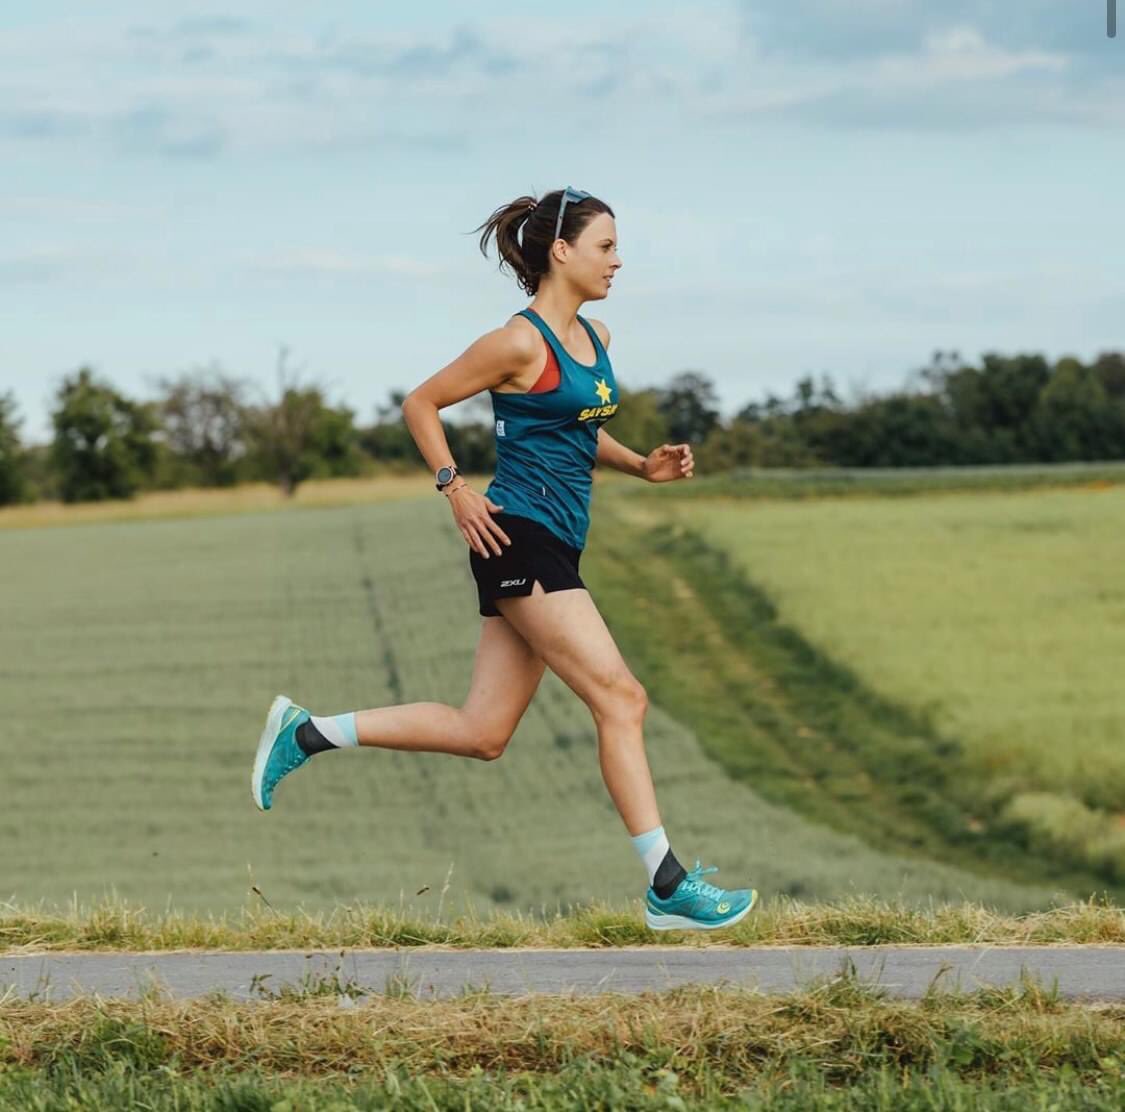 Running towards the holiday weekend like..
#inpursuitofawe #movebetter
📸: @__shemoves / @marcelhilger
Credit: TOPO Athletic